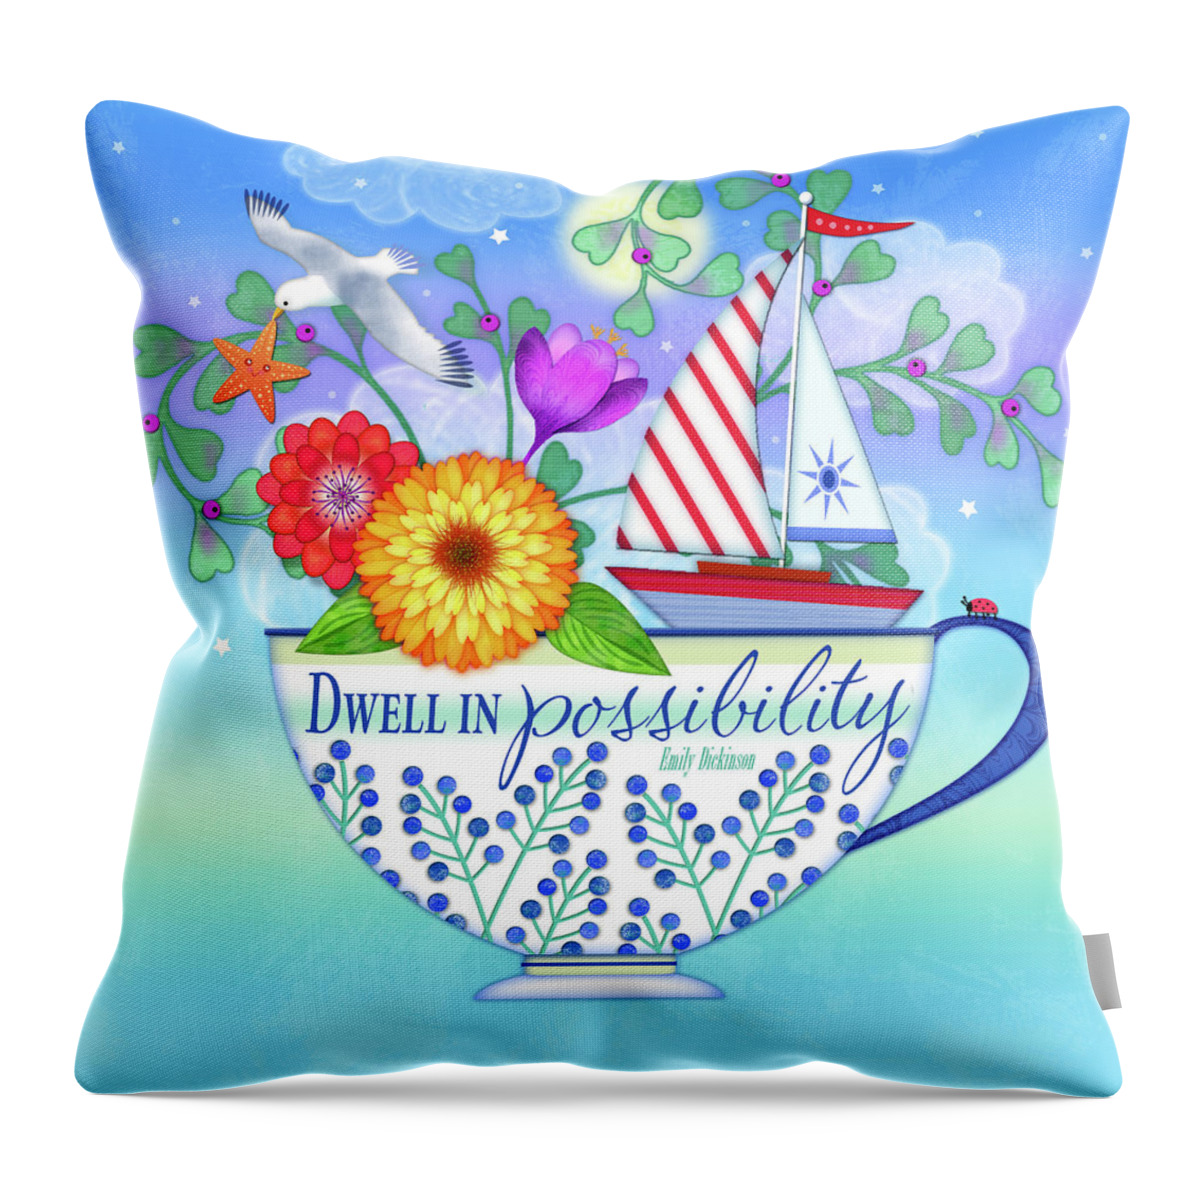 Teacup Throw Pillow featuring the digital art Dwell in Possibility by Valerie Drake Lesiak